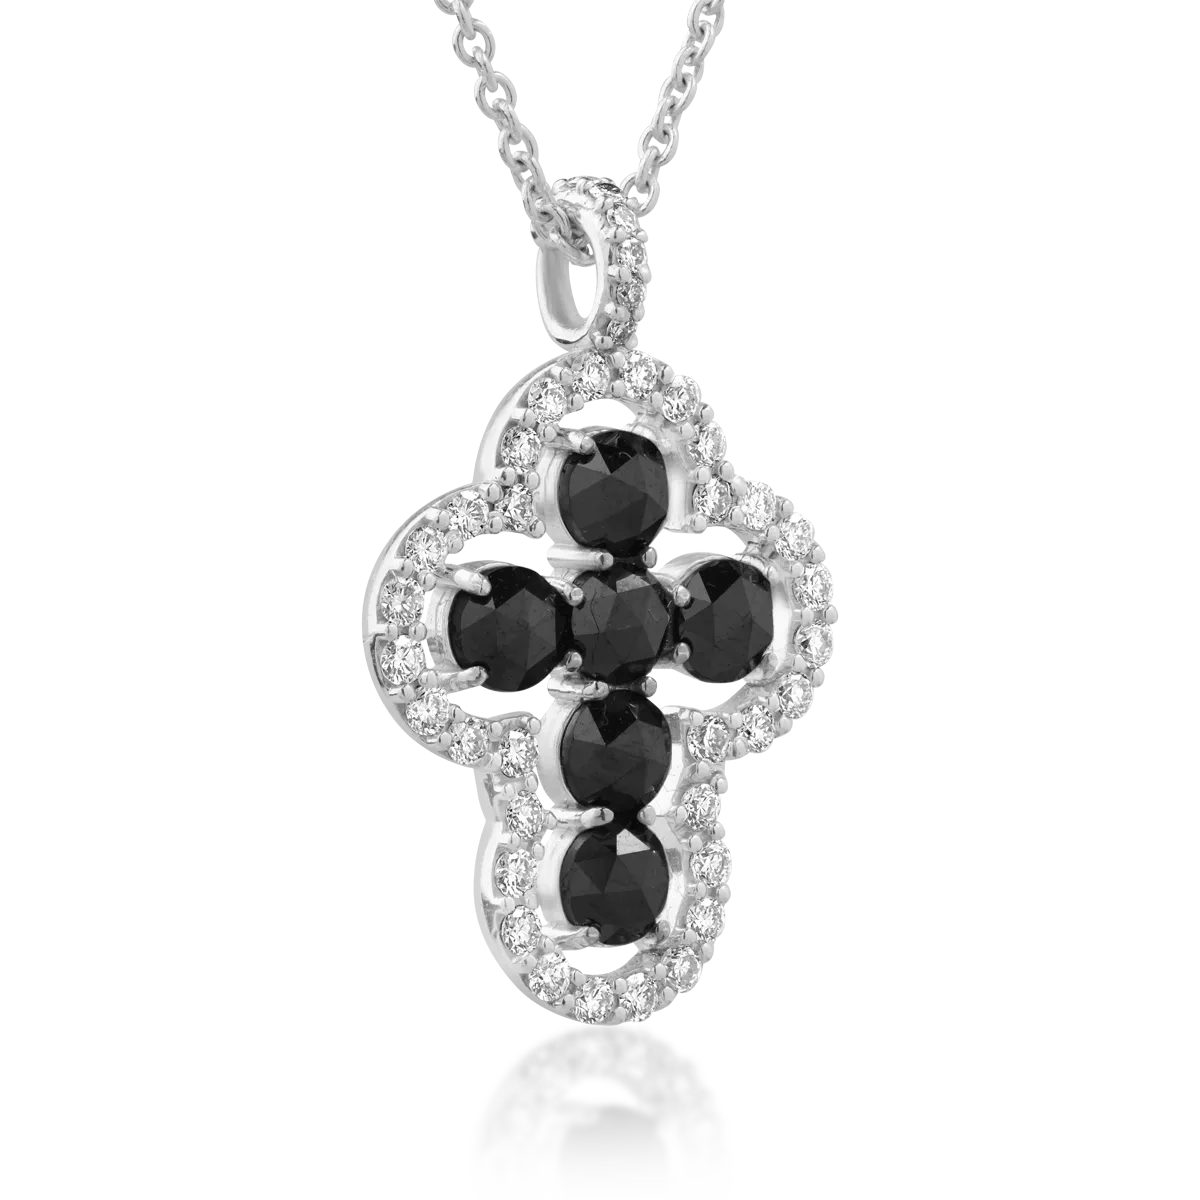 18K white gold cross pendant necklace with 0.88 black diamonds and 0.33ct clear diamonds